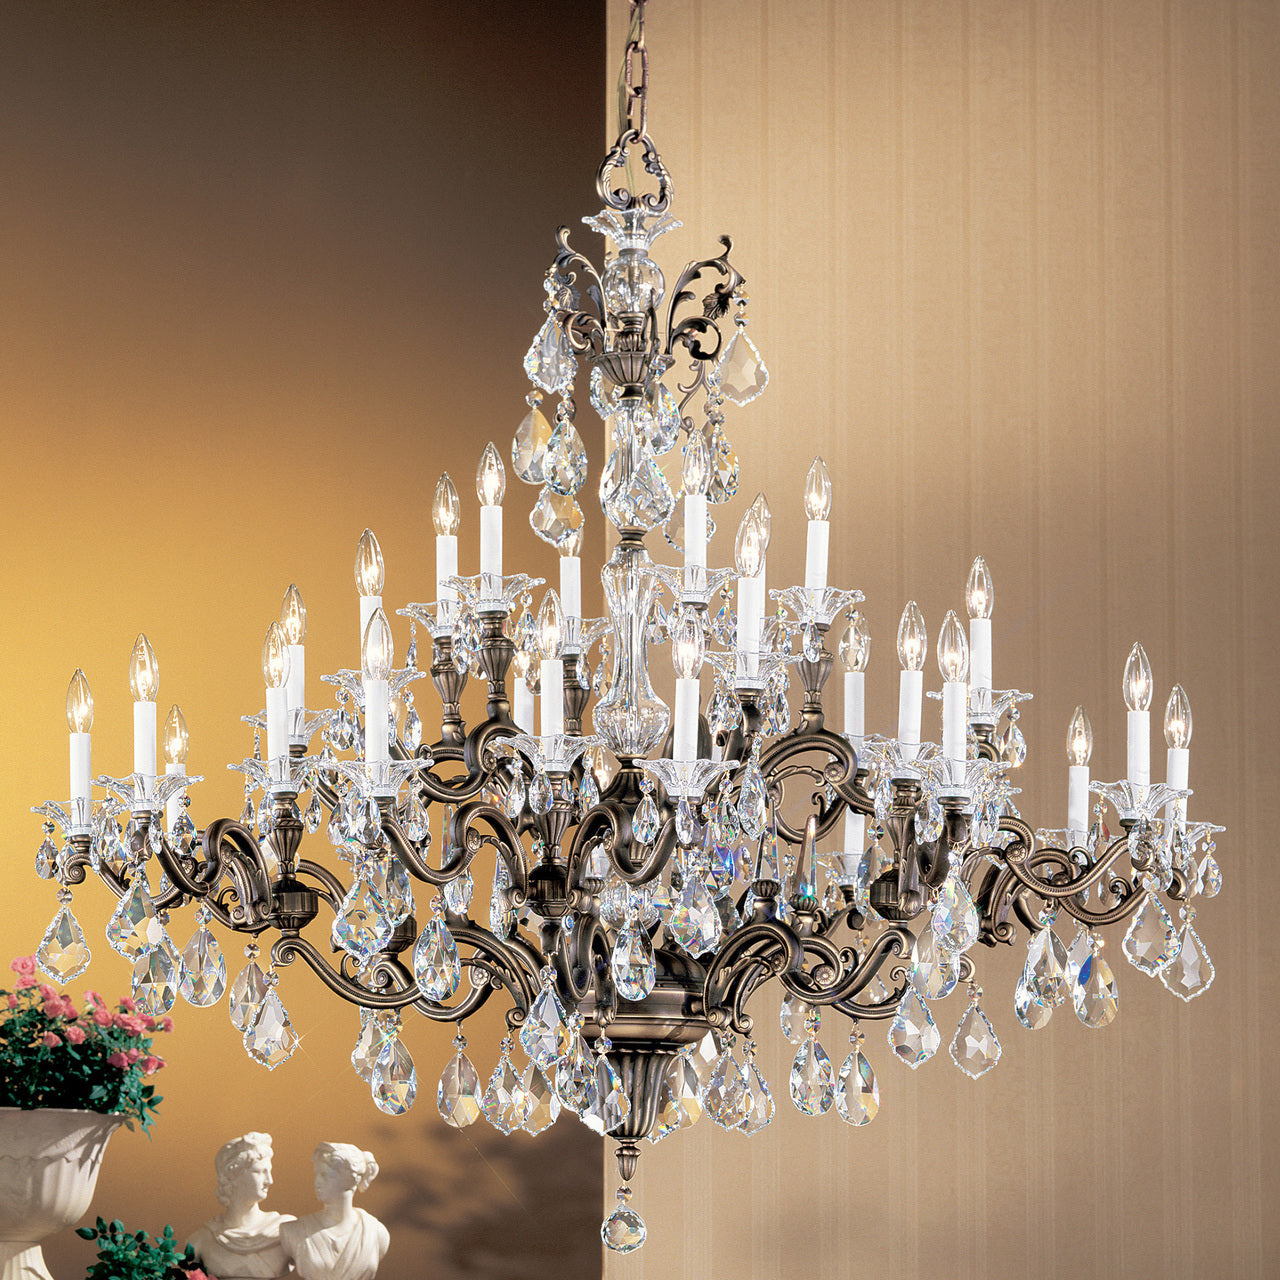 Classic Lighting 57130 RB SGT Via Firenze Crystal Chandelier in Roman Bronze (Imported from Spain)